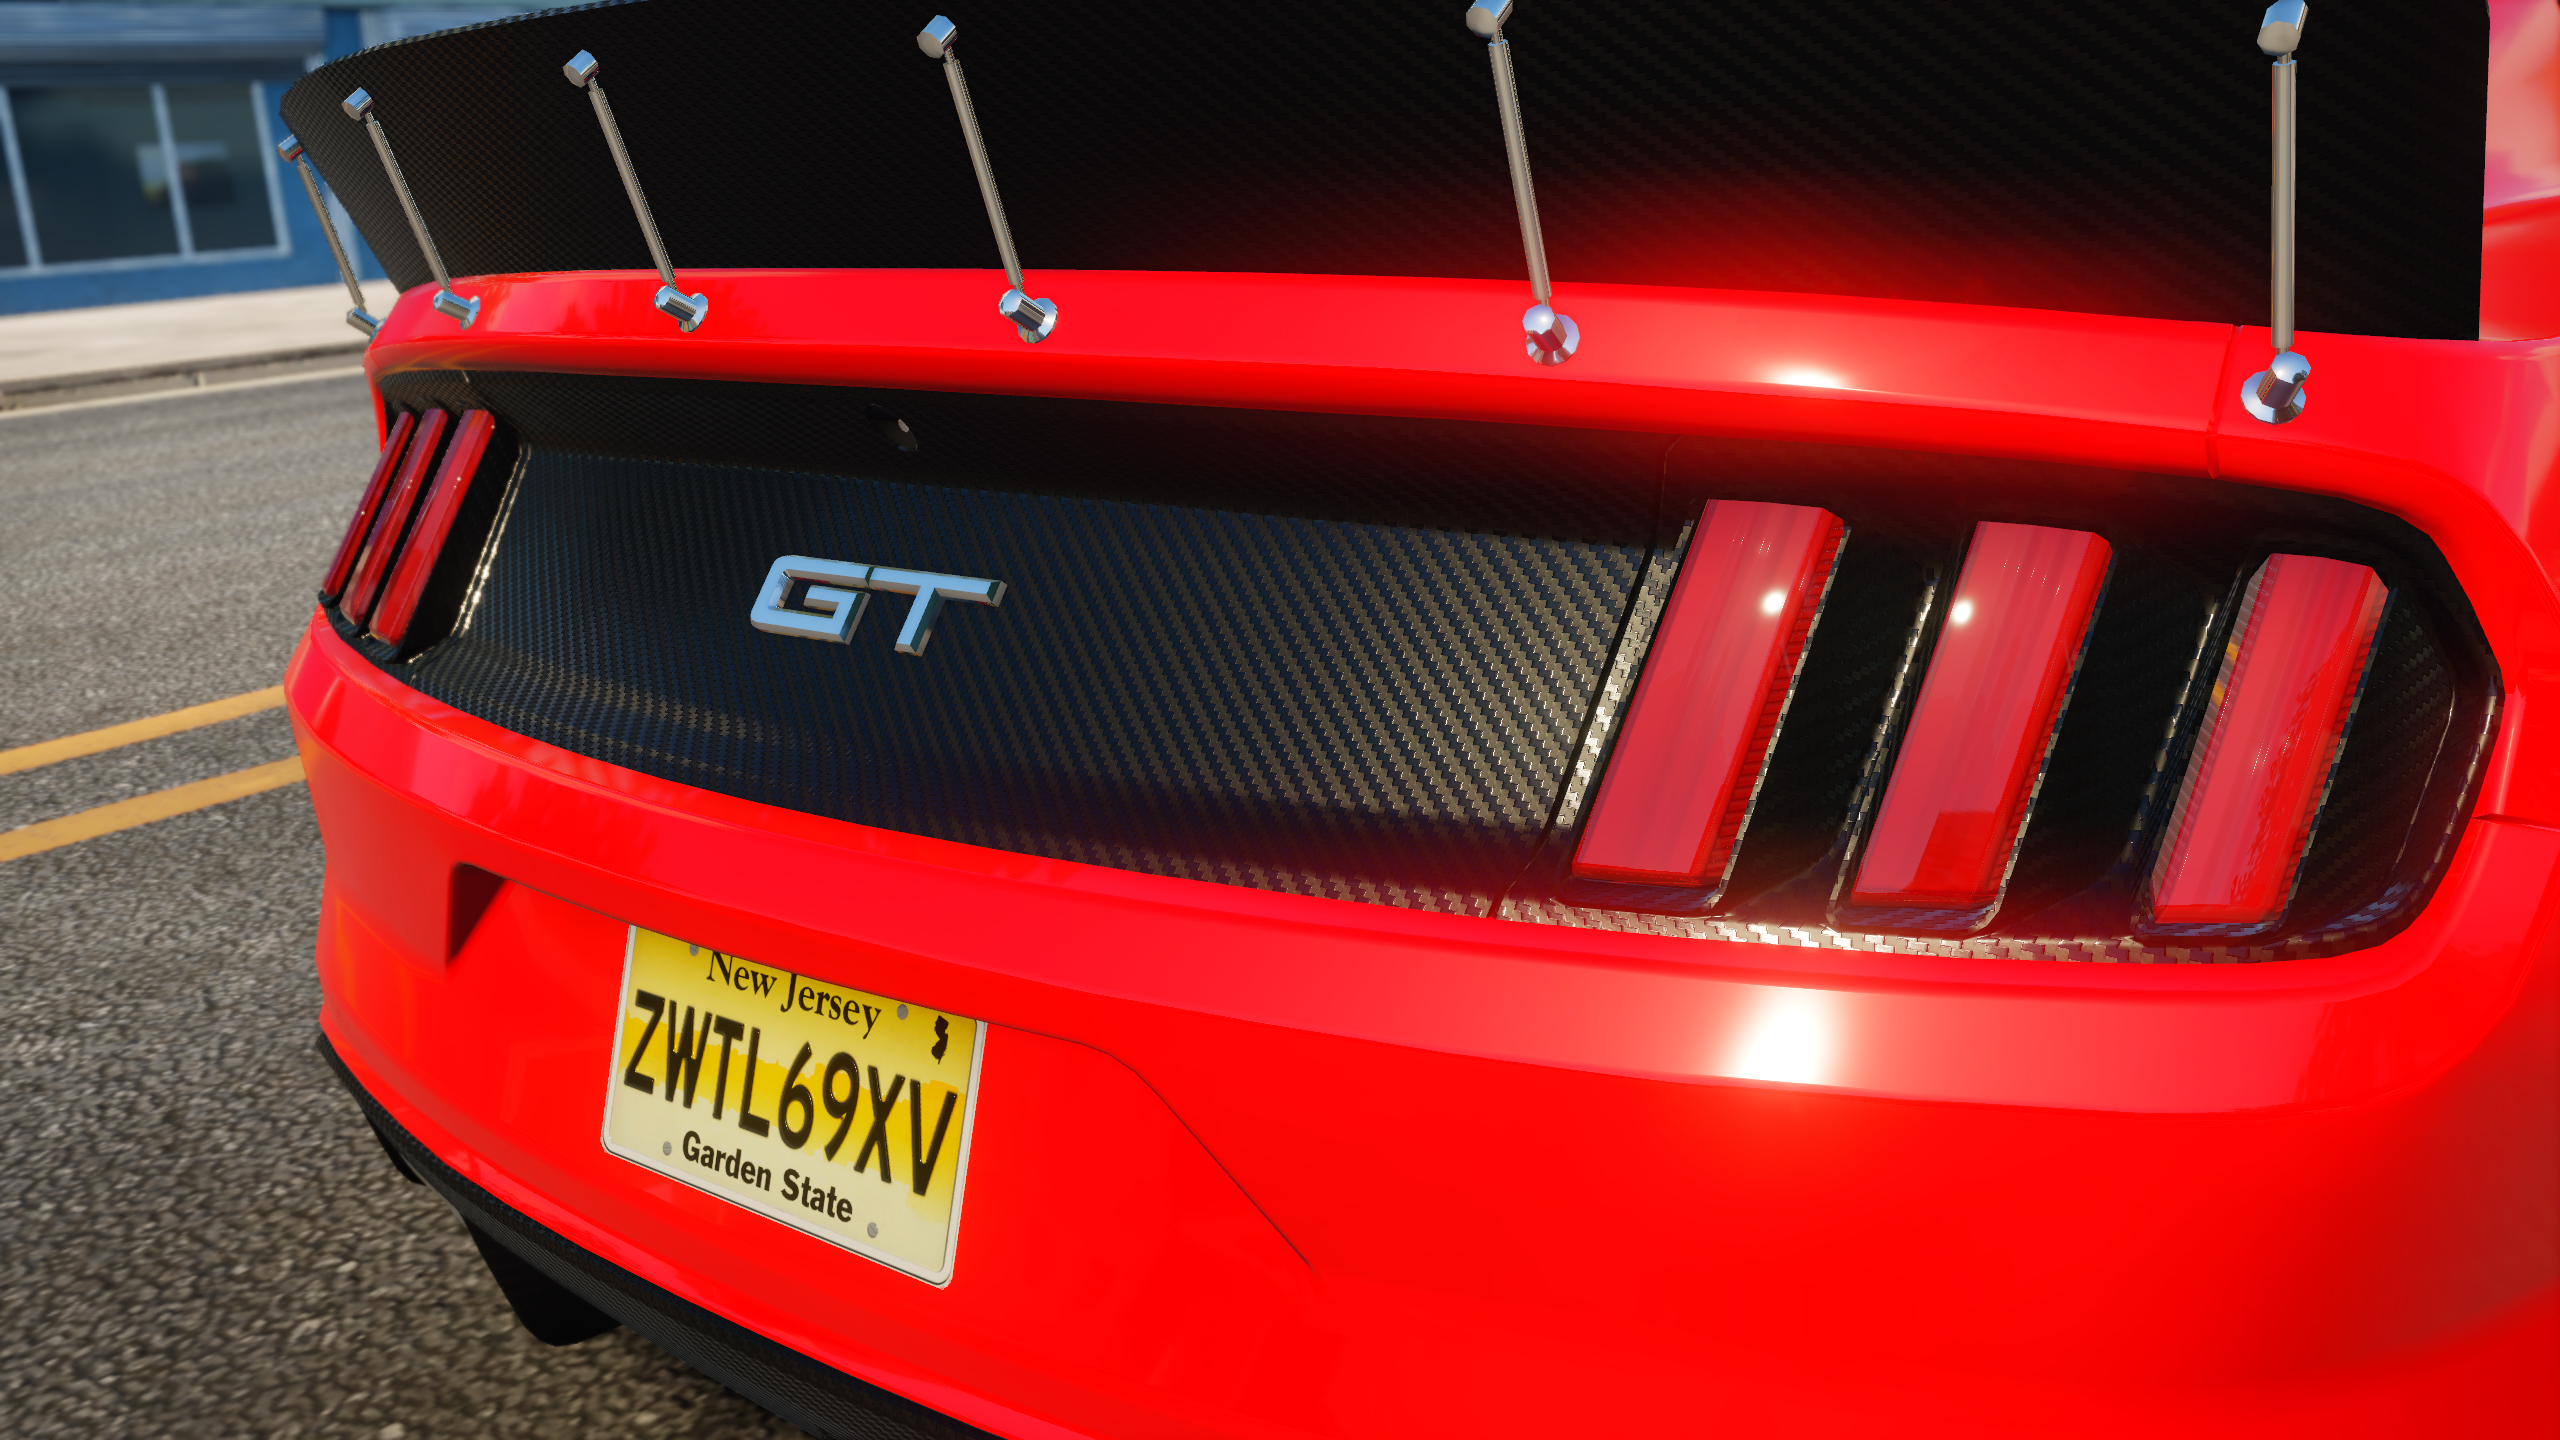 General 2560x1440 Ford Mustang The Crew car nitro Ford video games red cars muscle cars taillights Ford Mustang S550